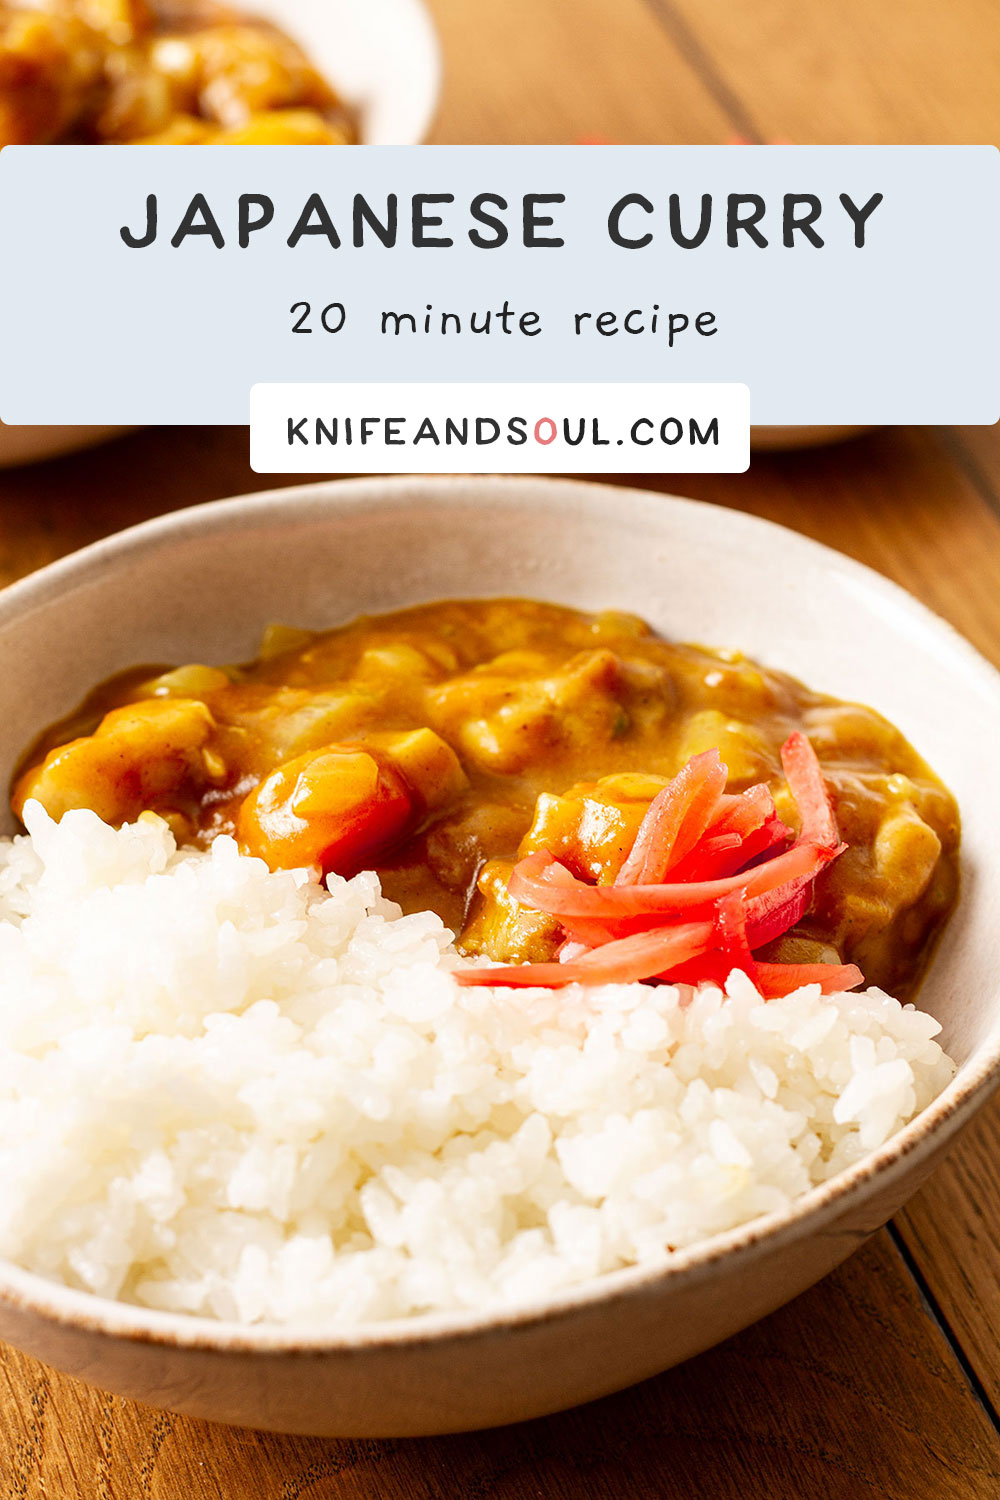 Japanese Curry using S&B Golden Curry - Knife and Soul